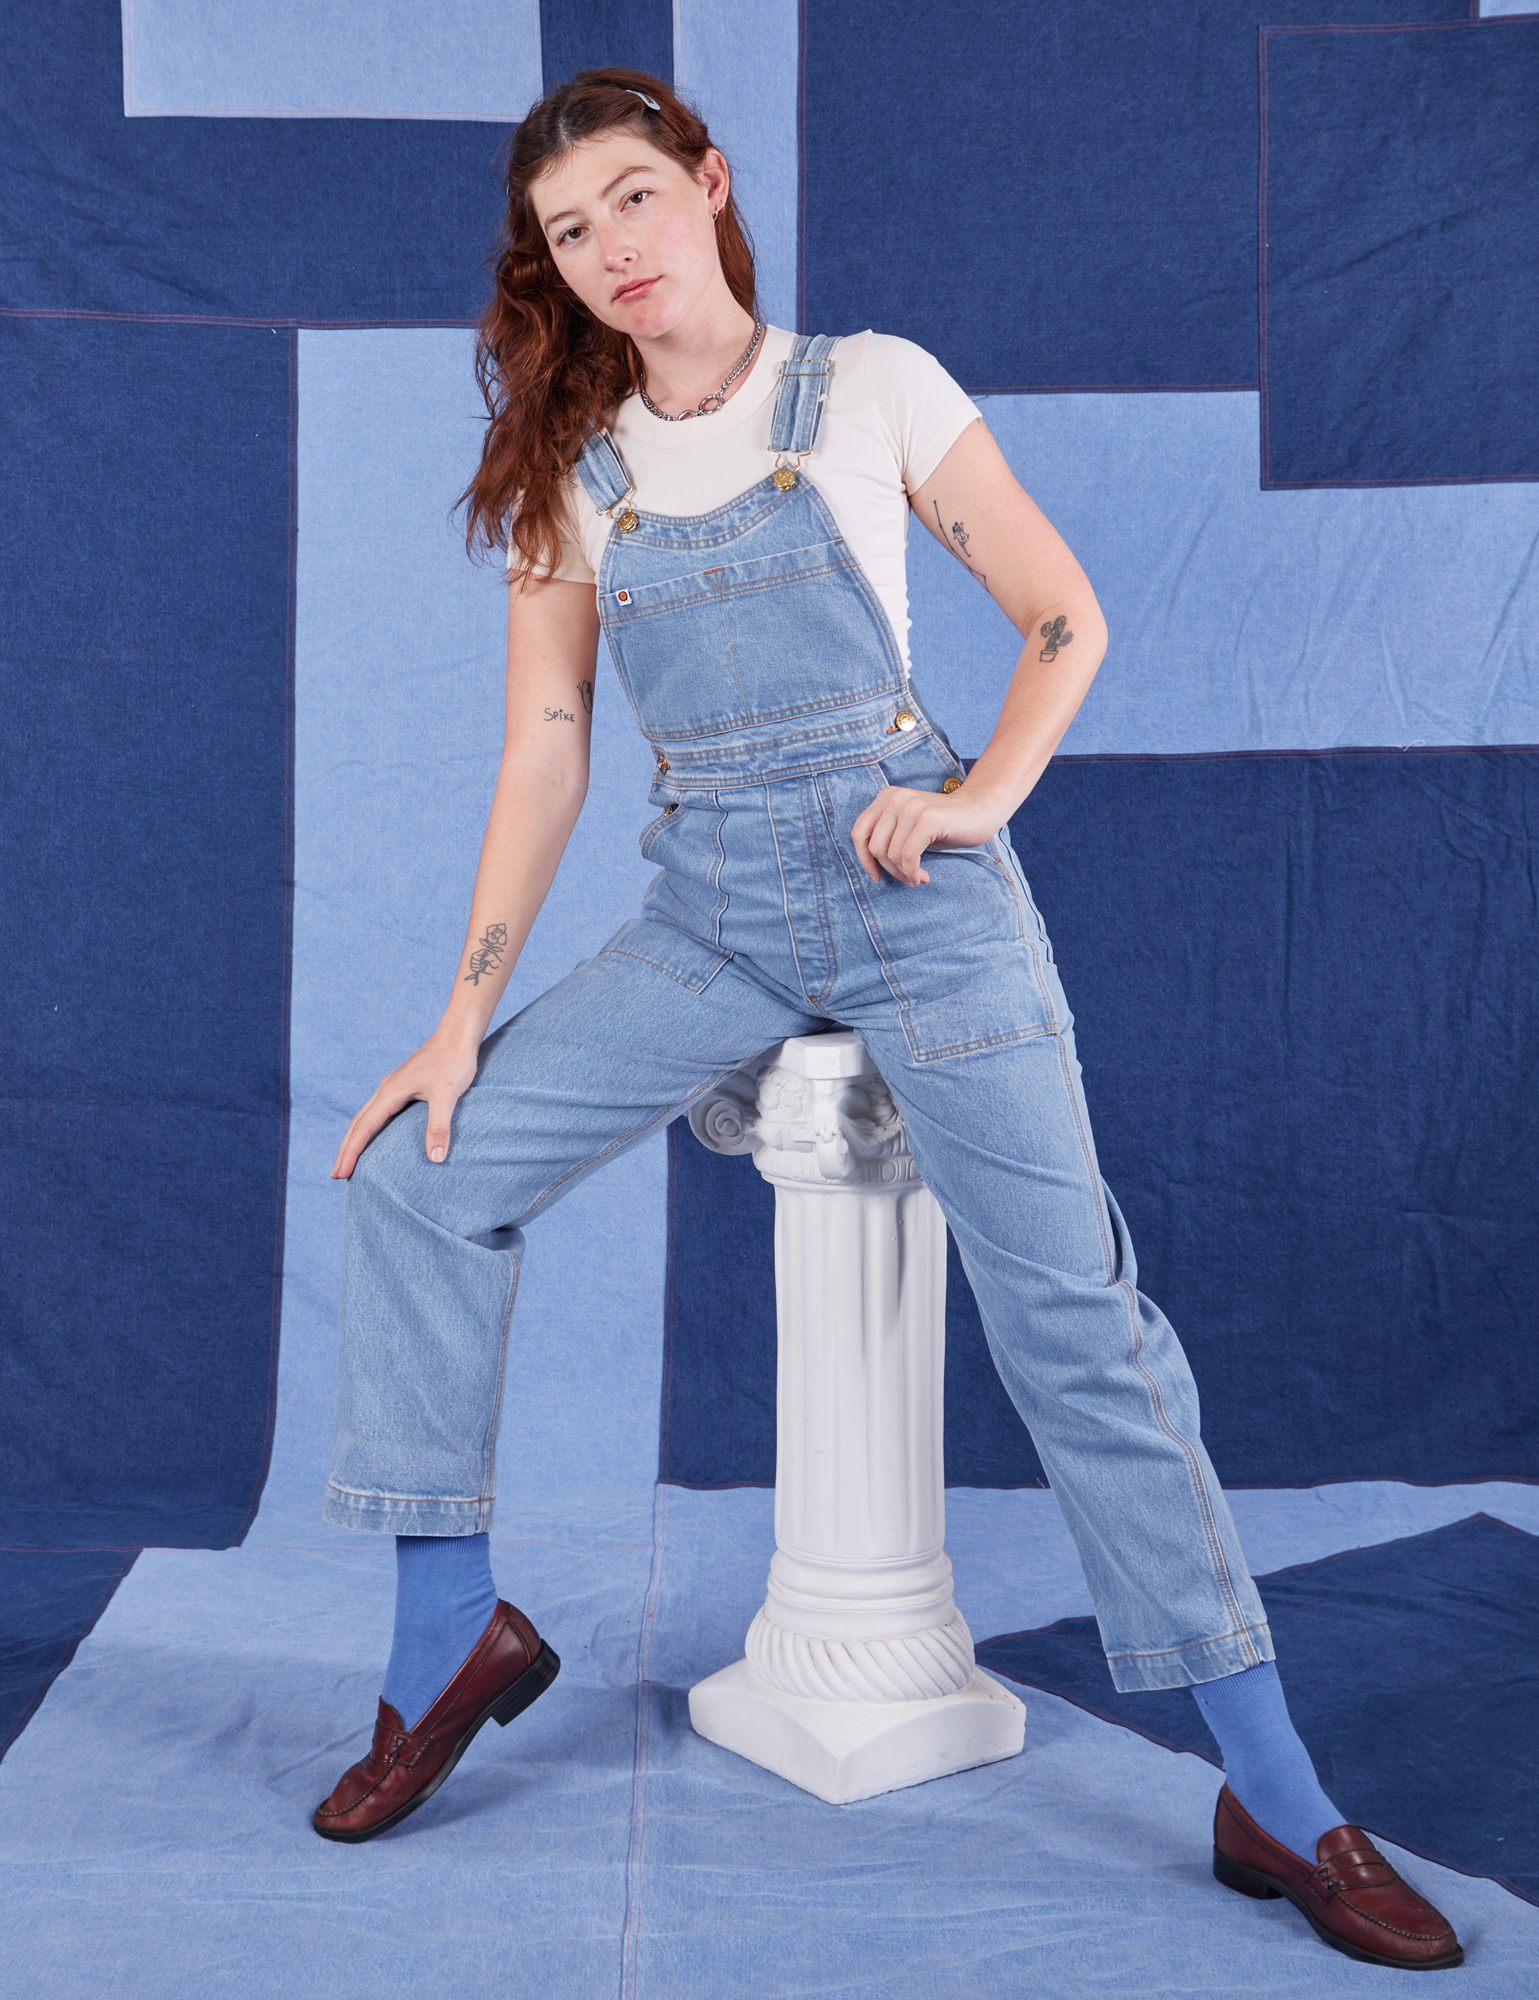 Alex is 5&#39;8&quot; and wearing P Indigo Denim Original Overalls in Light Wash with a vintage off-white Baby Tee underneath